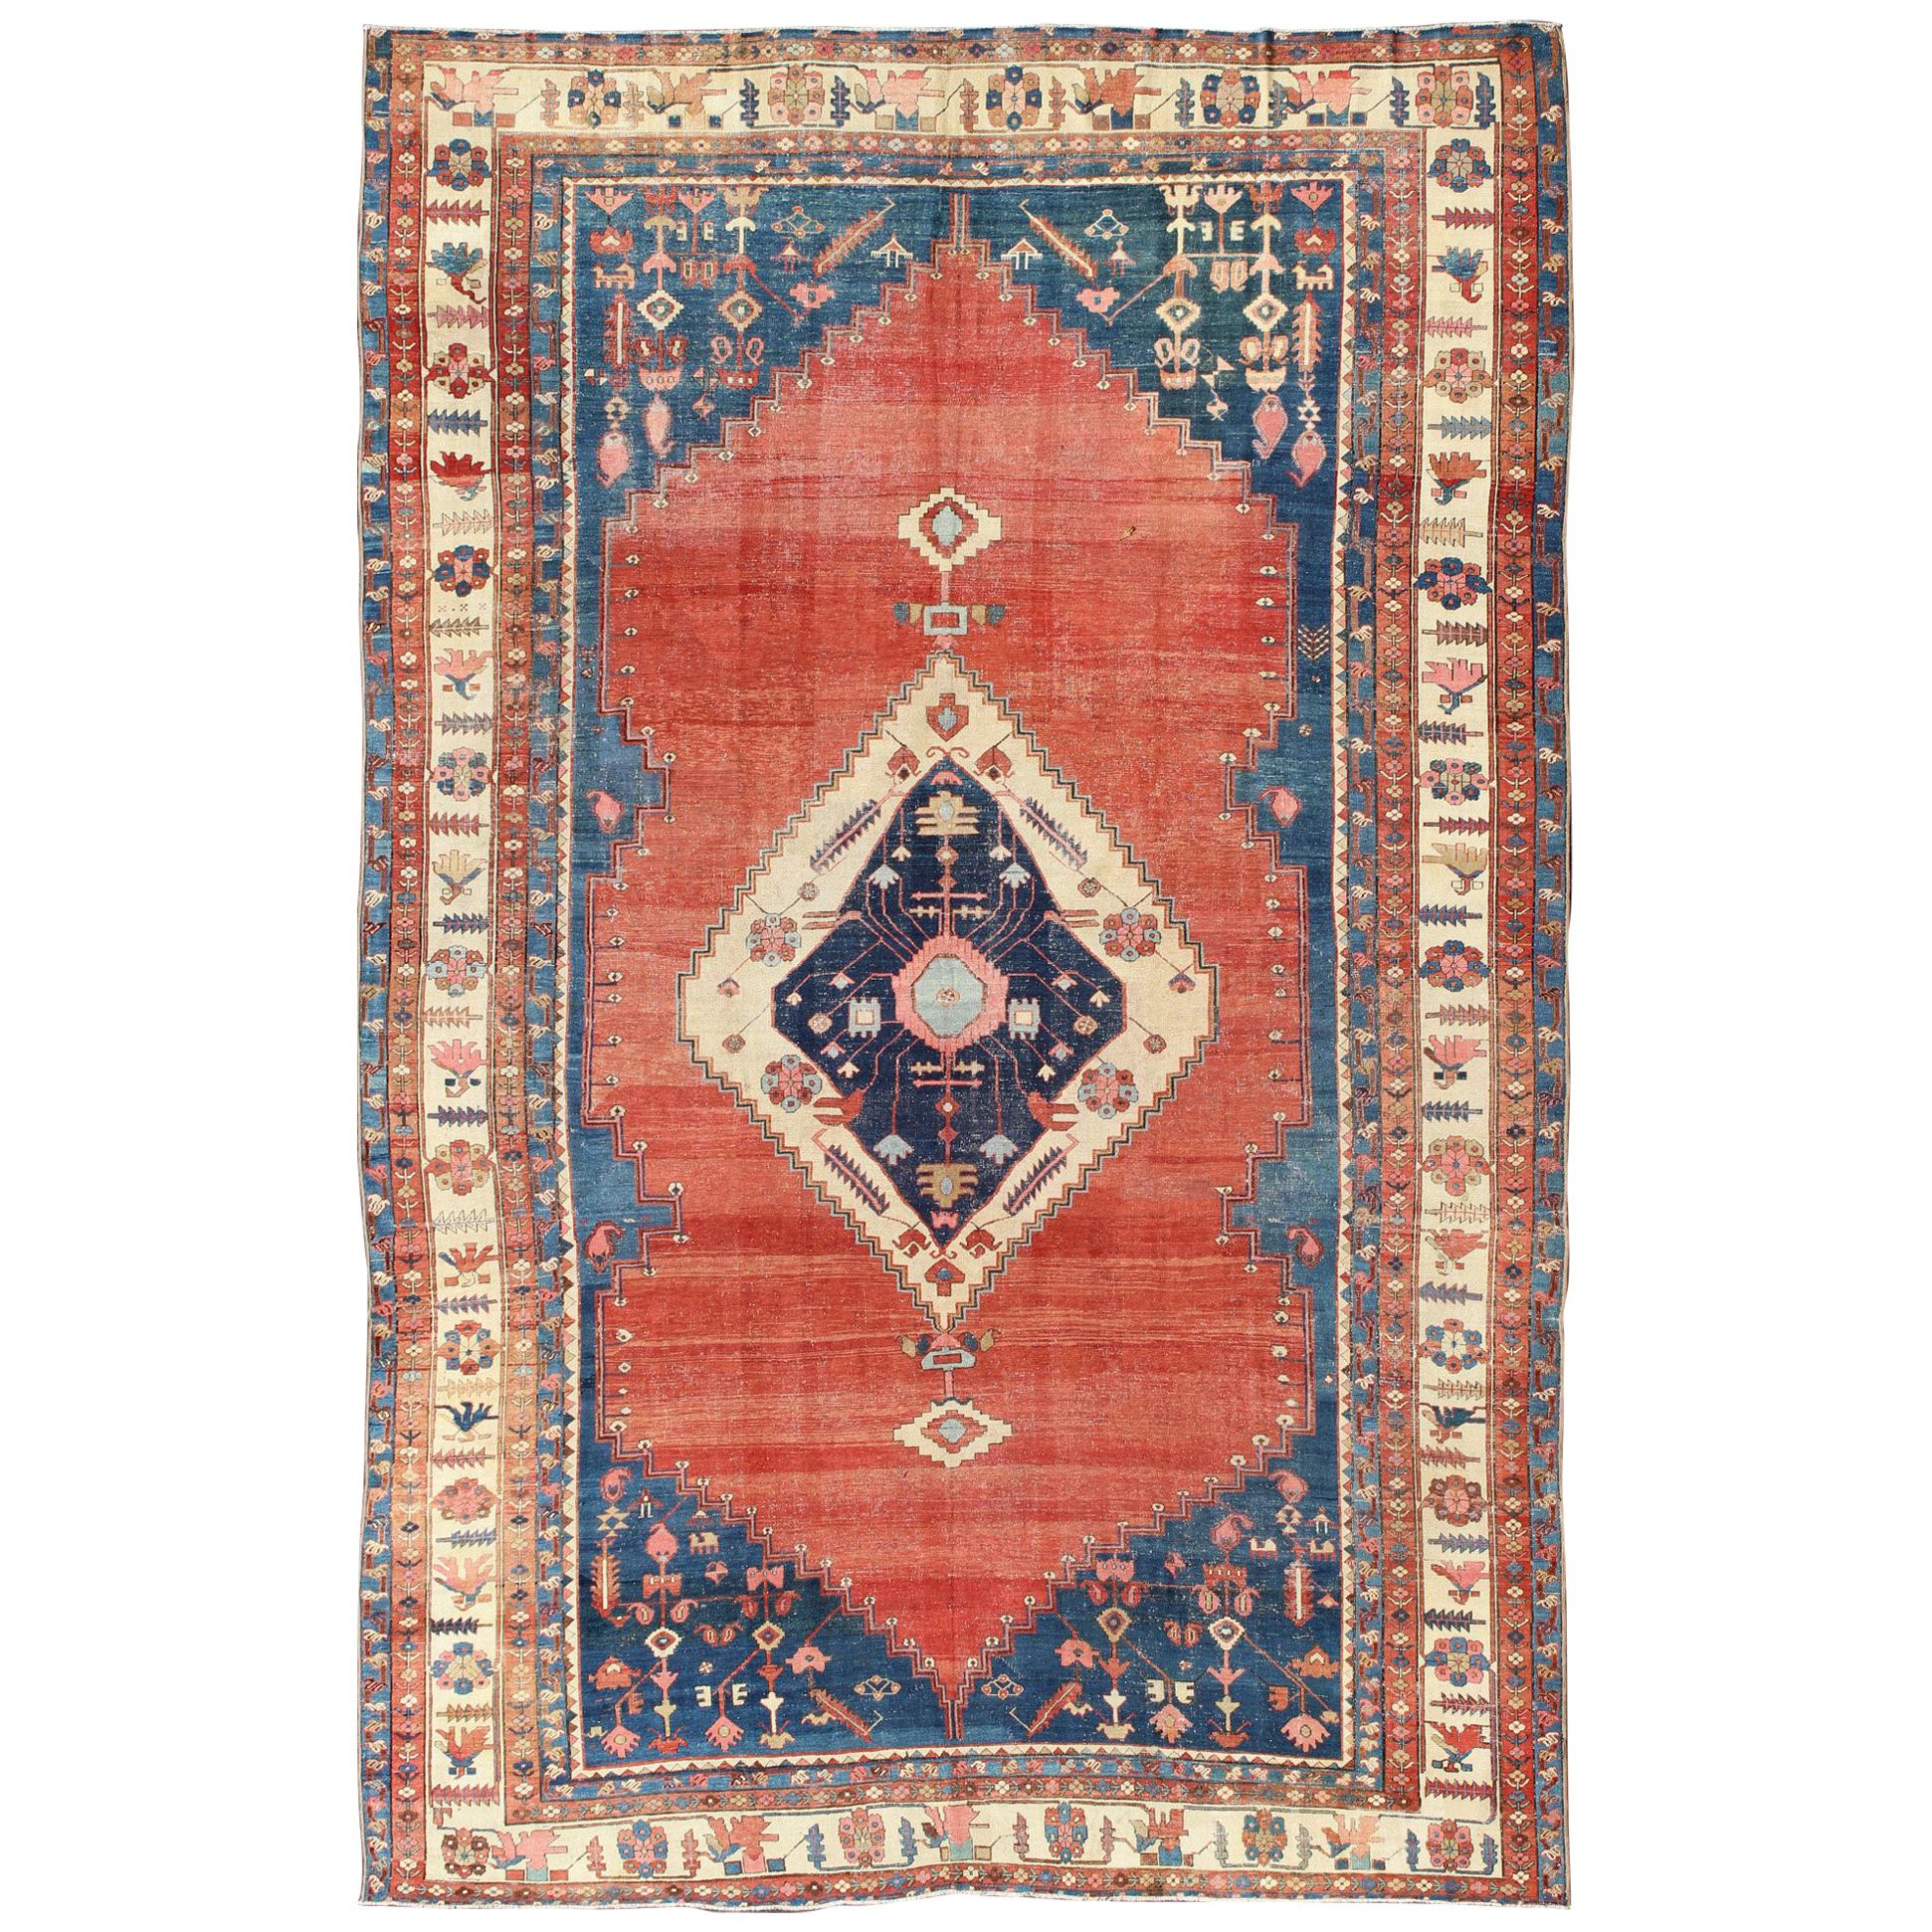 Finely Woven 19th Century Antique Persian Bakhshaiesh Rug in Rust Red and Blue